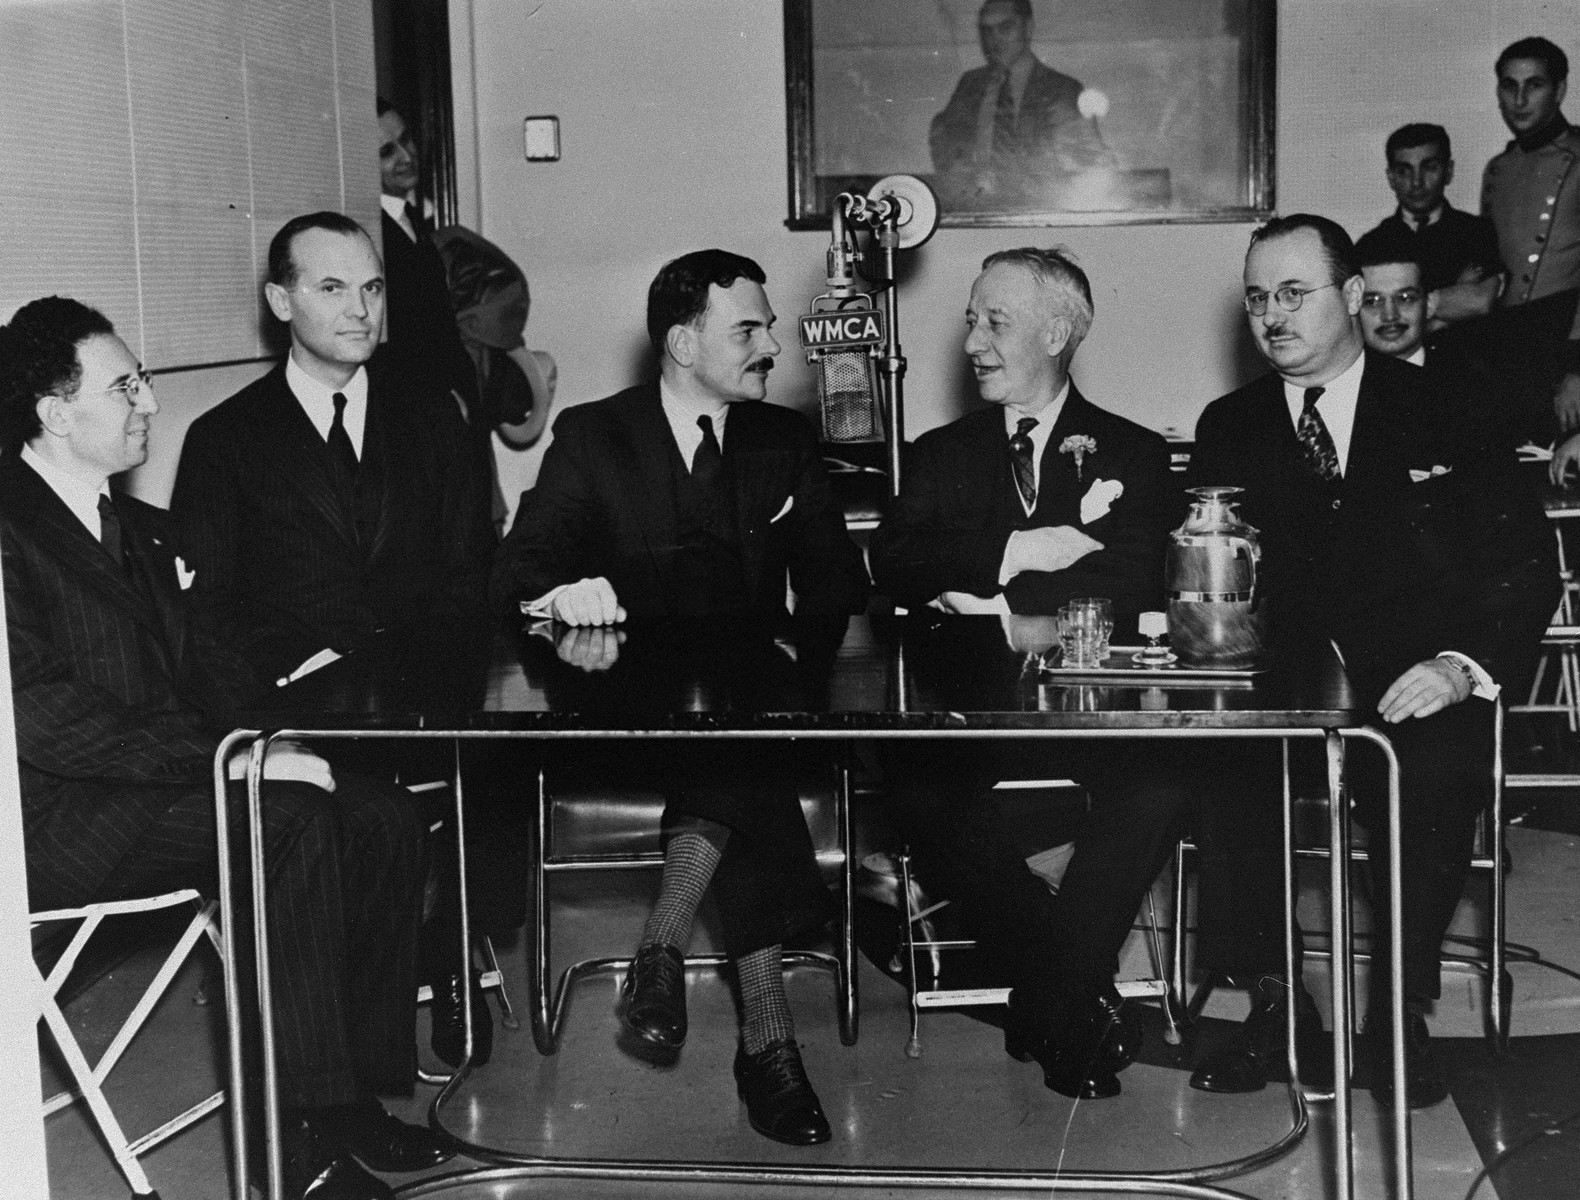 Five public figures sit around a table in the studios of radio station WMCA, where they will participate in a radio broadcast condemning the Nazi persecution of German Jews.  

Pictured from left to right are: Johan Smertenko, Executive Director of the Non-Sectarian Anti-Nazi League; the Reverend Elmer McKee, Rector of St. George P.E. Church; District Attorney Thomas E. Dewey; Former Governor Alfred E. Smith; and Dr. Mitchell Salem Fisher, a member of the Anti-Nazi League.